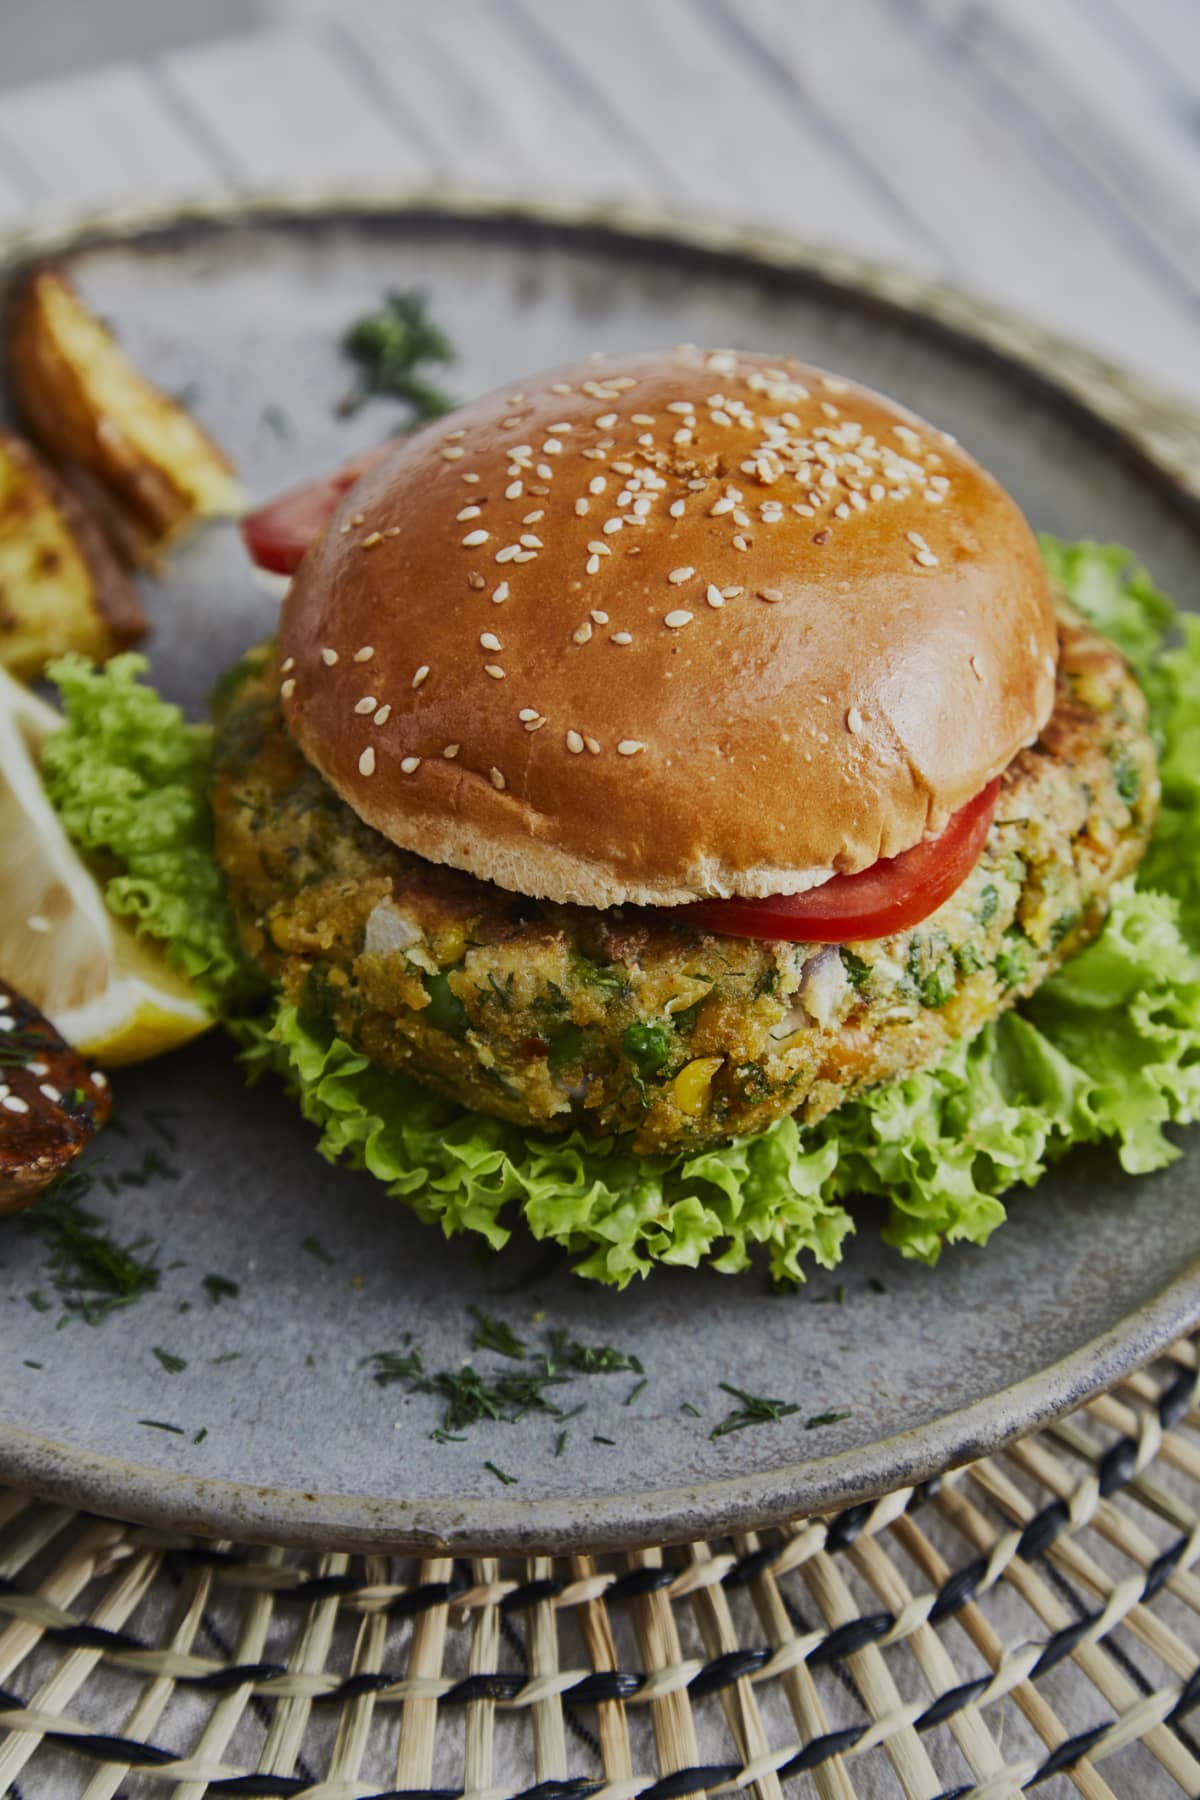 Vegan hamburger on a handmade ceramic plate, made of zucchini, green pea, seasoning, herbs and spices, close up